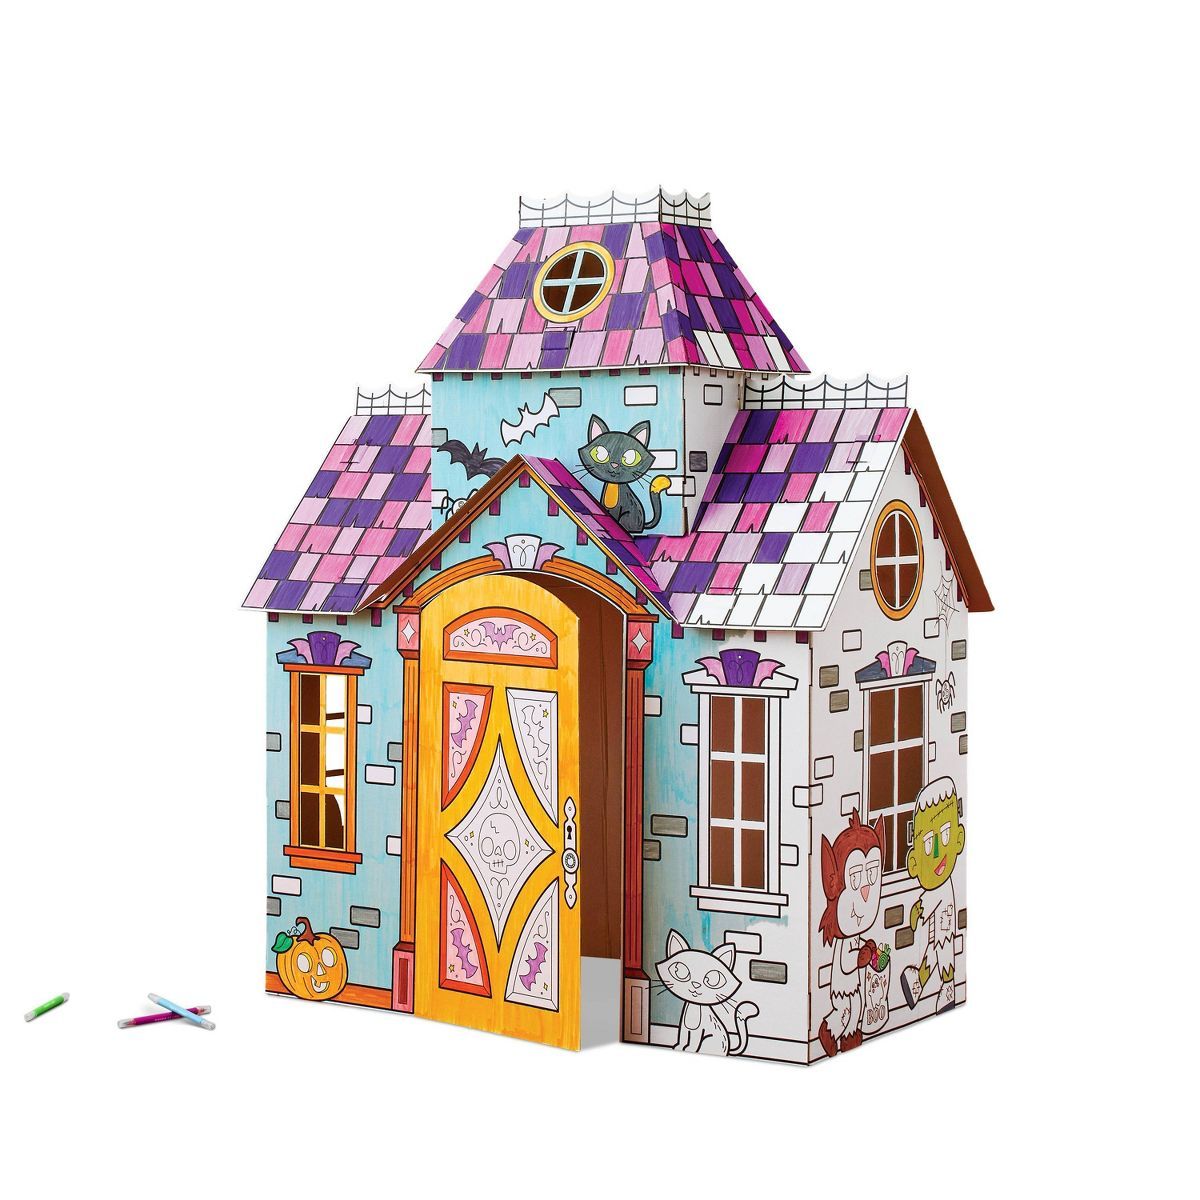 Halloween Color-Your-Own Haunted House Fort Kit - Mondo Llama™ | Target